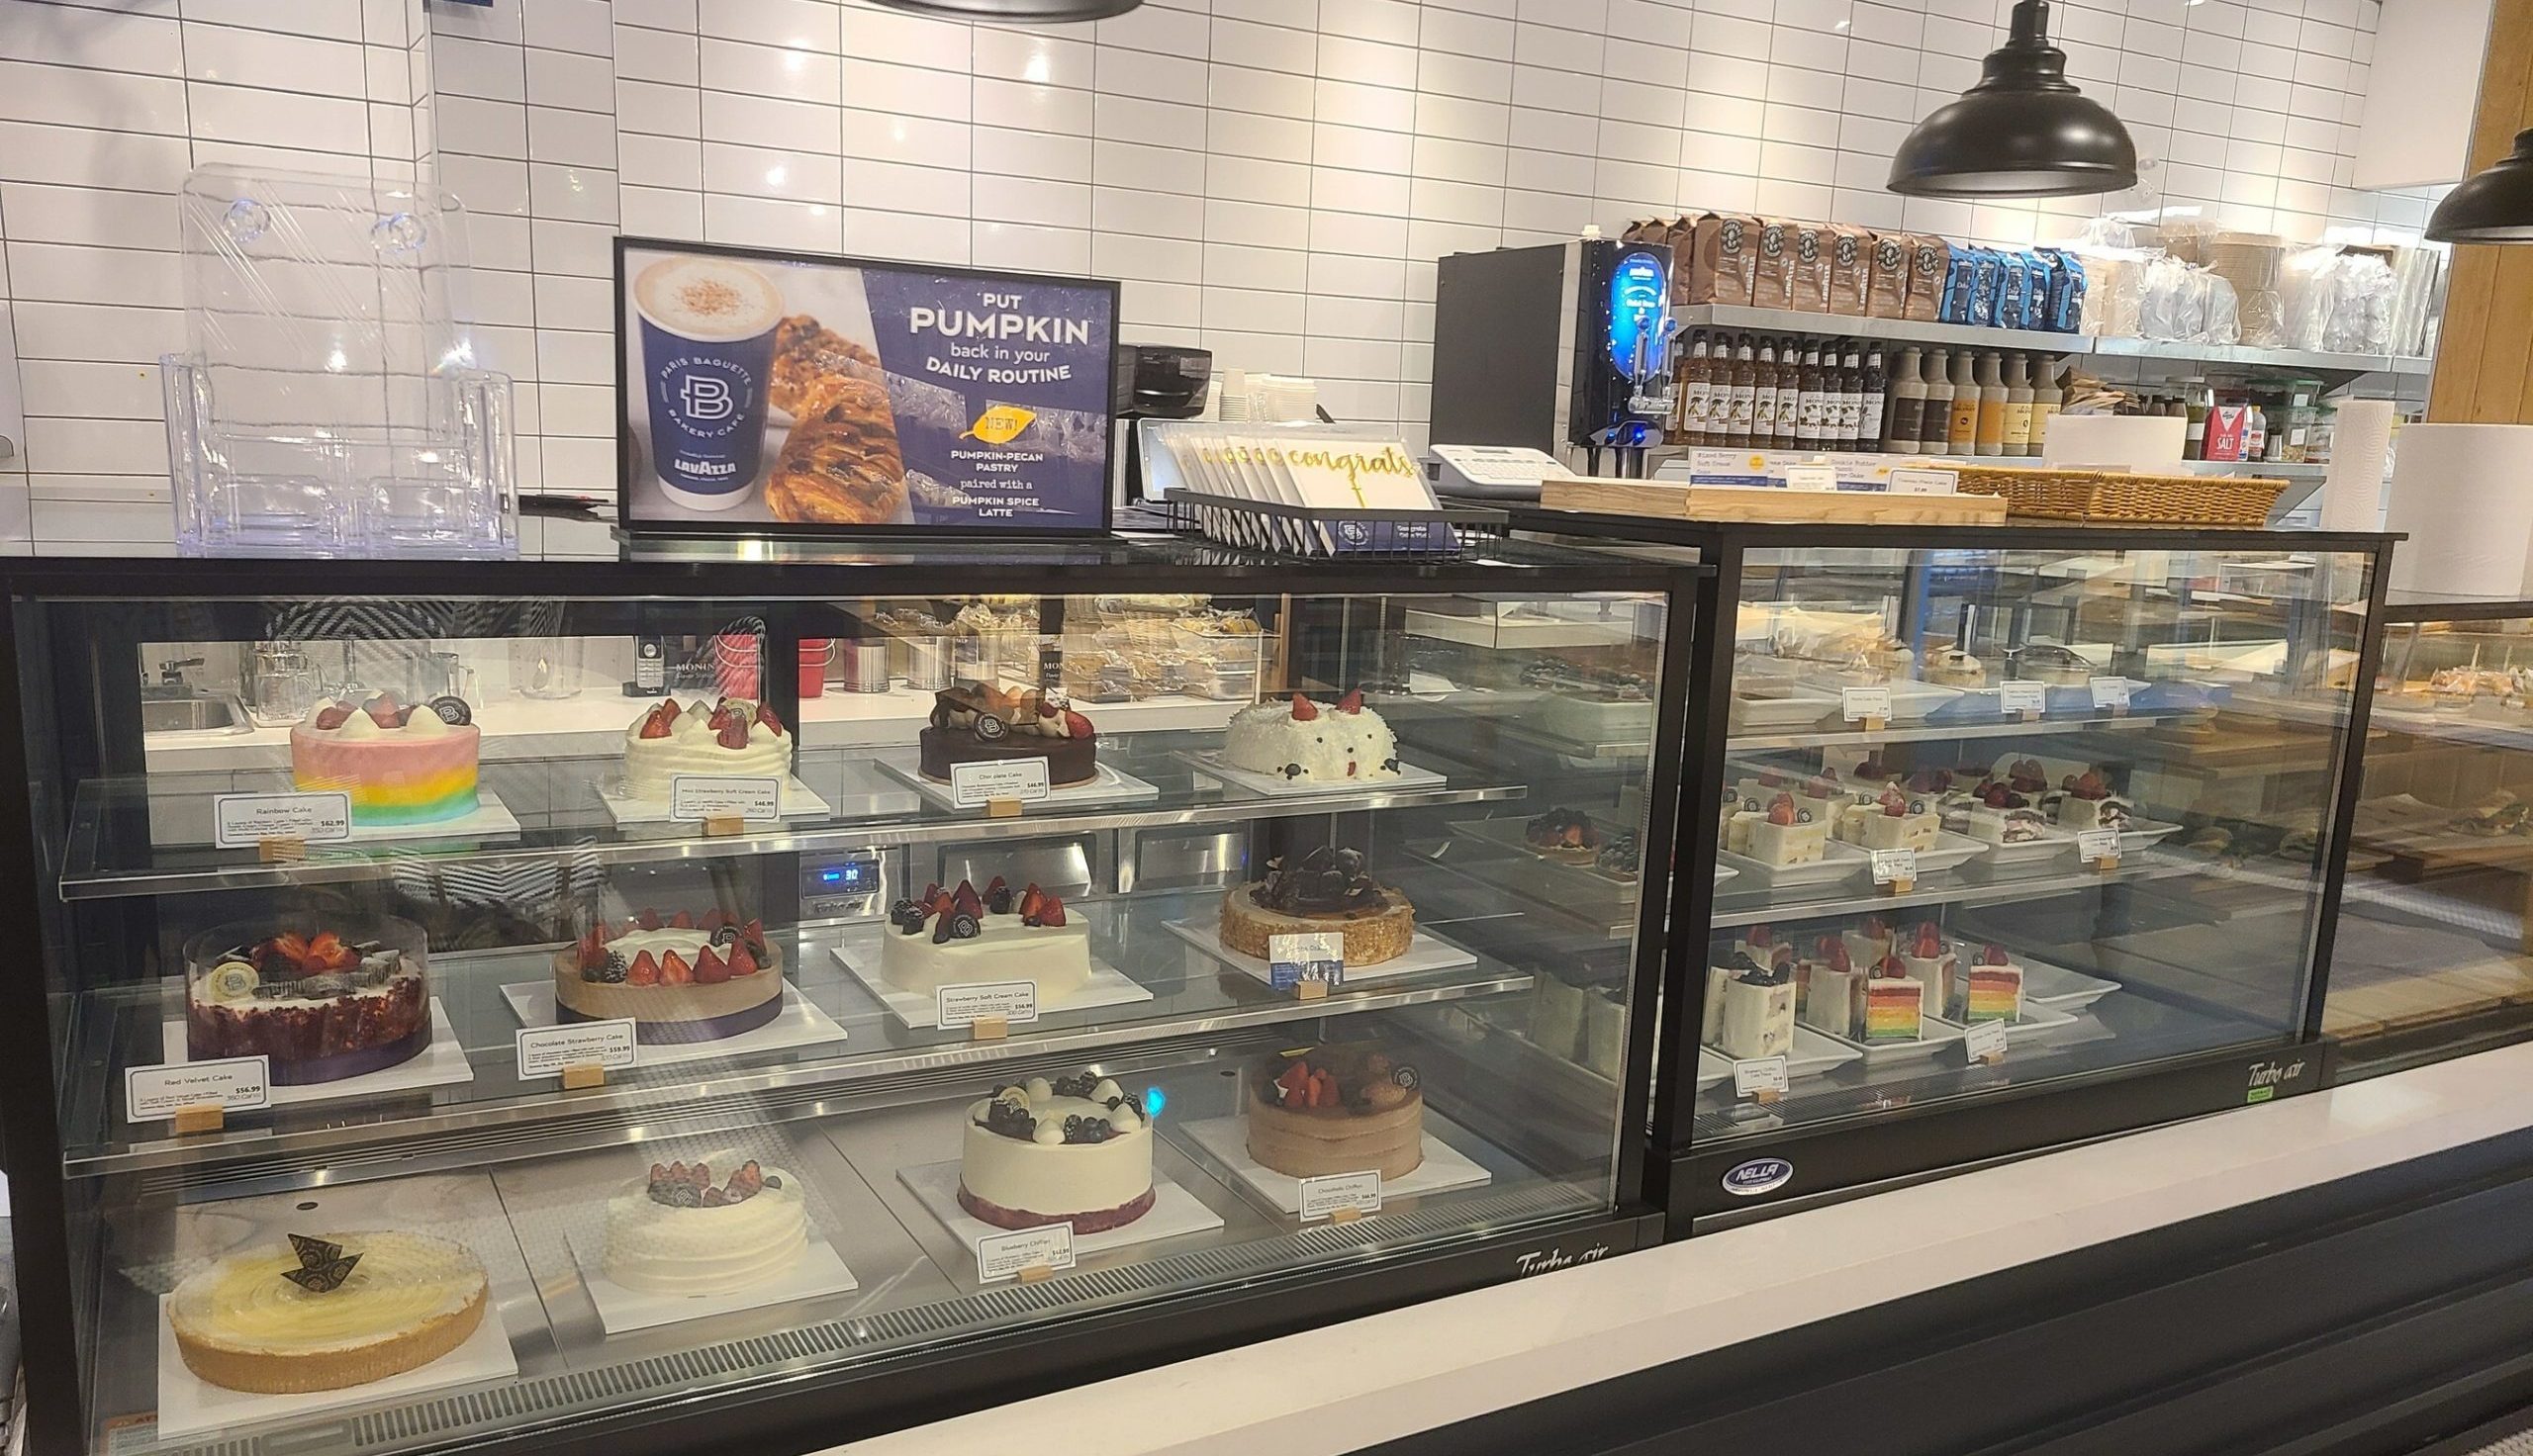 Counter displaying cakes in Paris Baguette Cafe